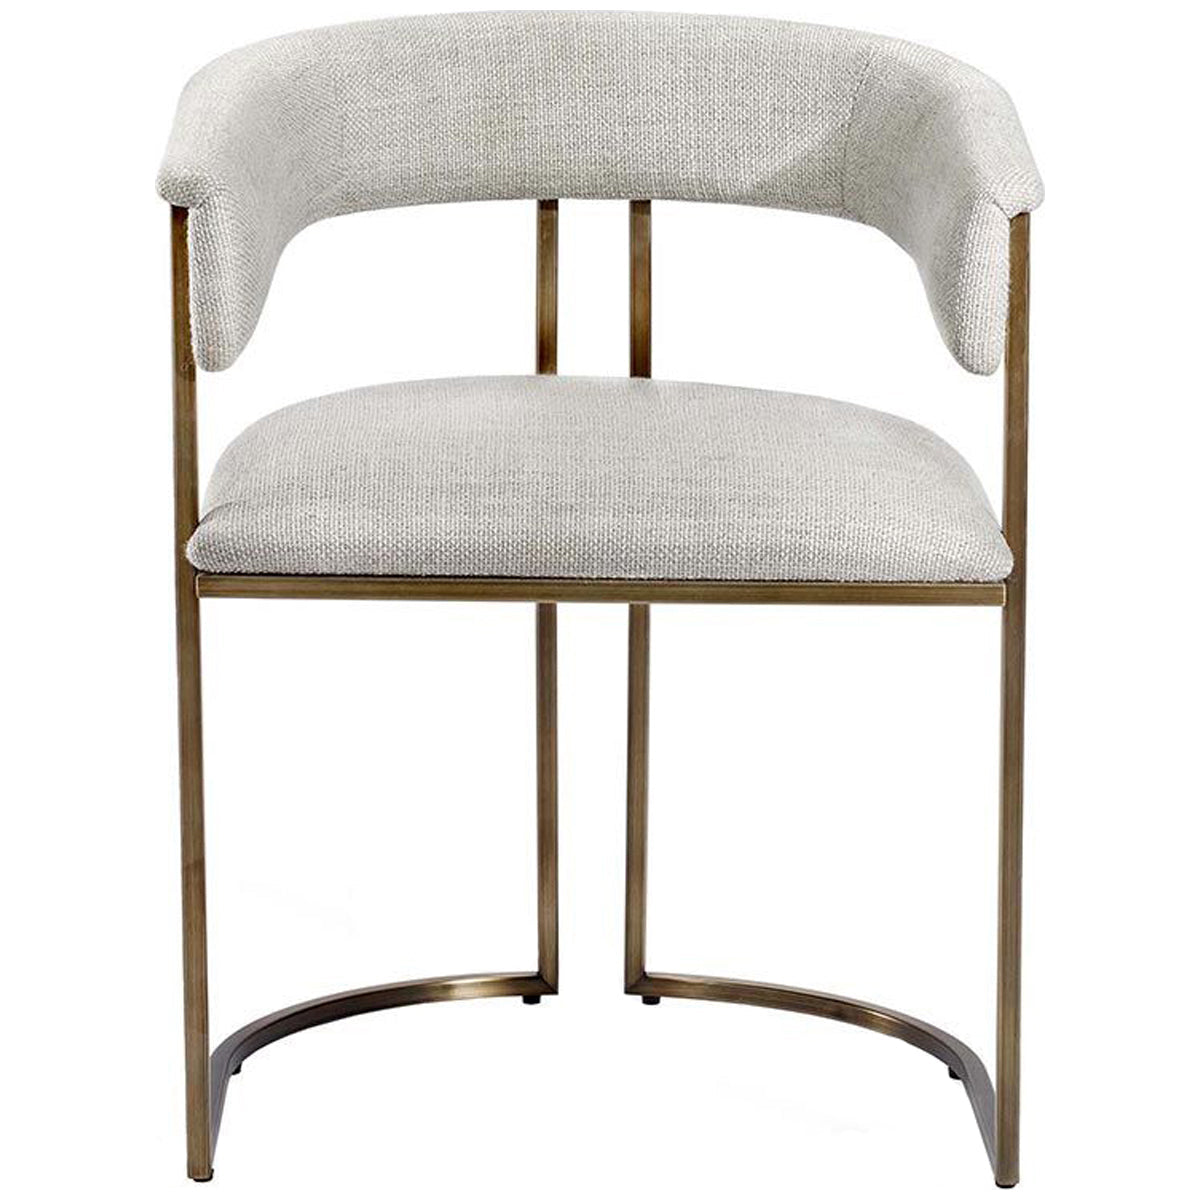 A&J Homes Studio Chelmsford Upholstered King Louis Back Arm Chair in  Antique Taupe/Beige - ShopStyle